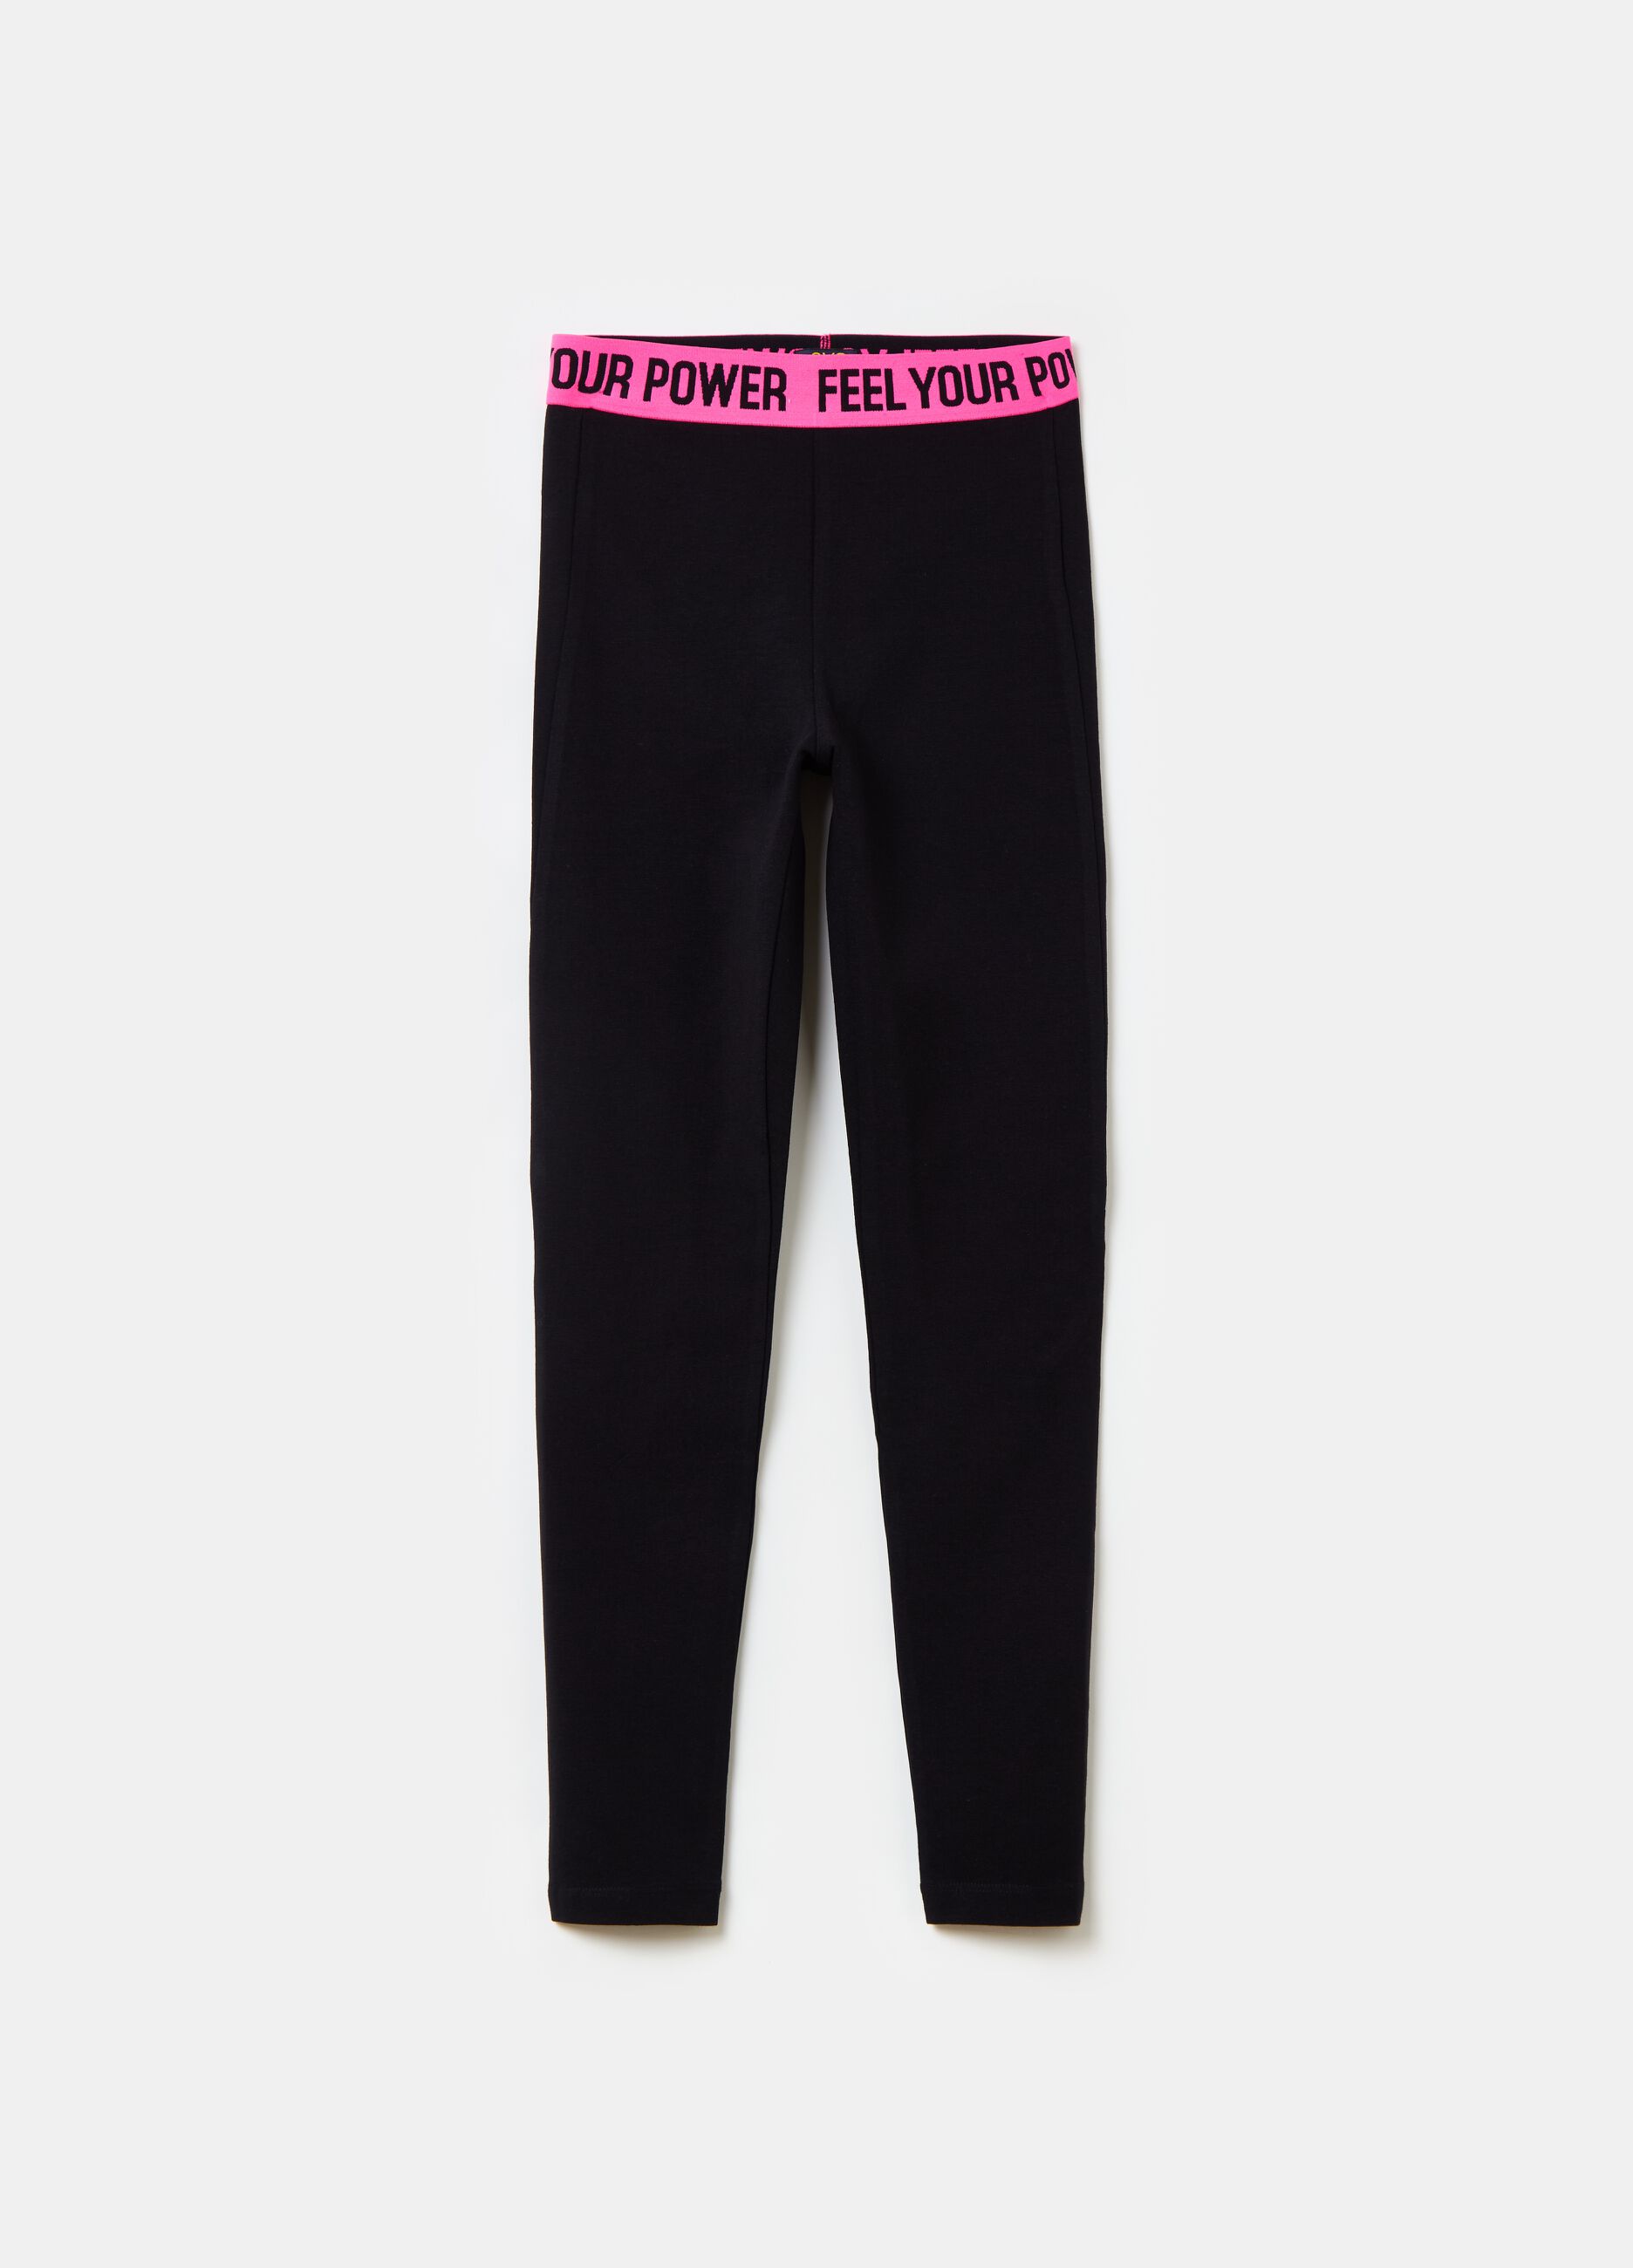 Stretch cotton leggings with lettering